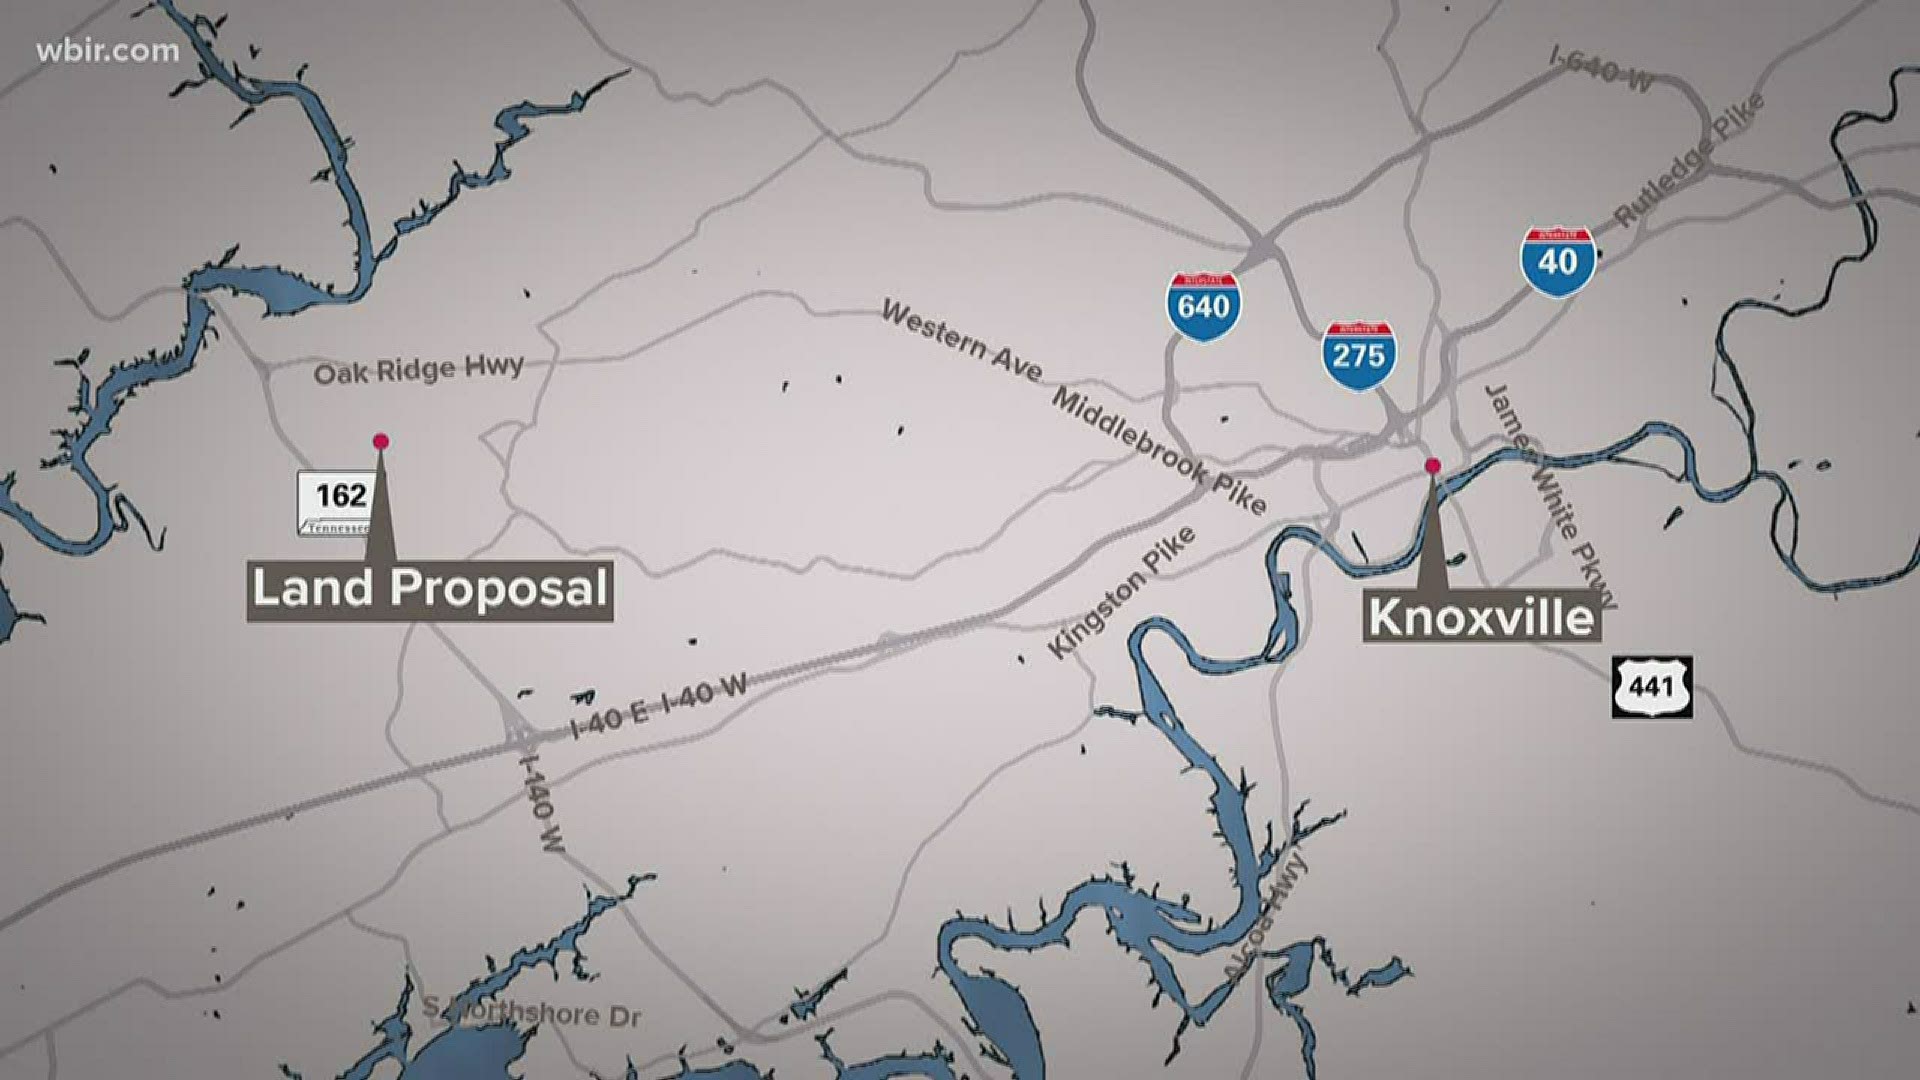 Knox County Schools is ready to spend about $2.3 million for land in the Karns area to make way for a new elementary school.